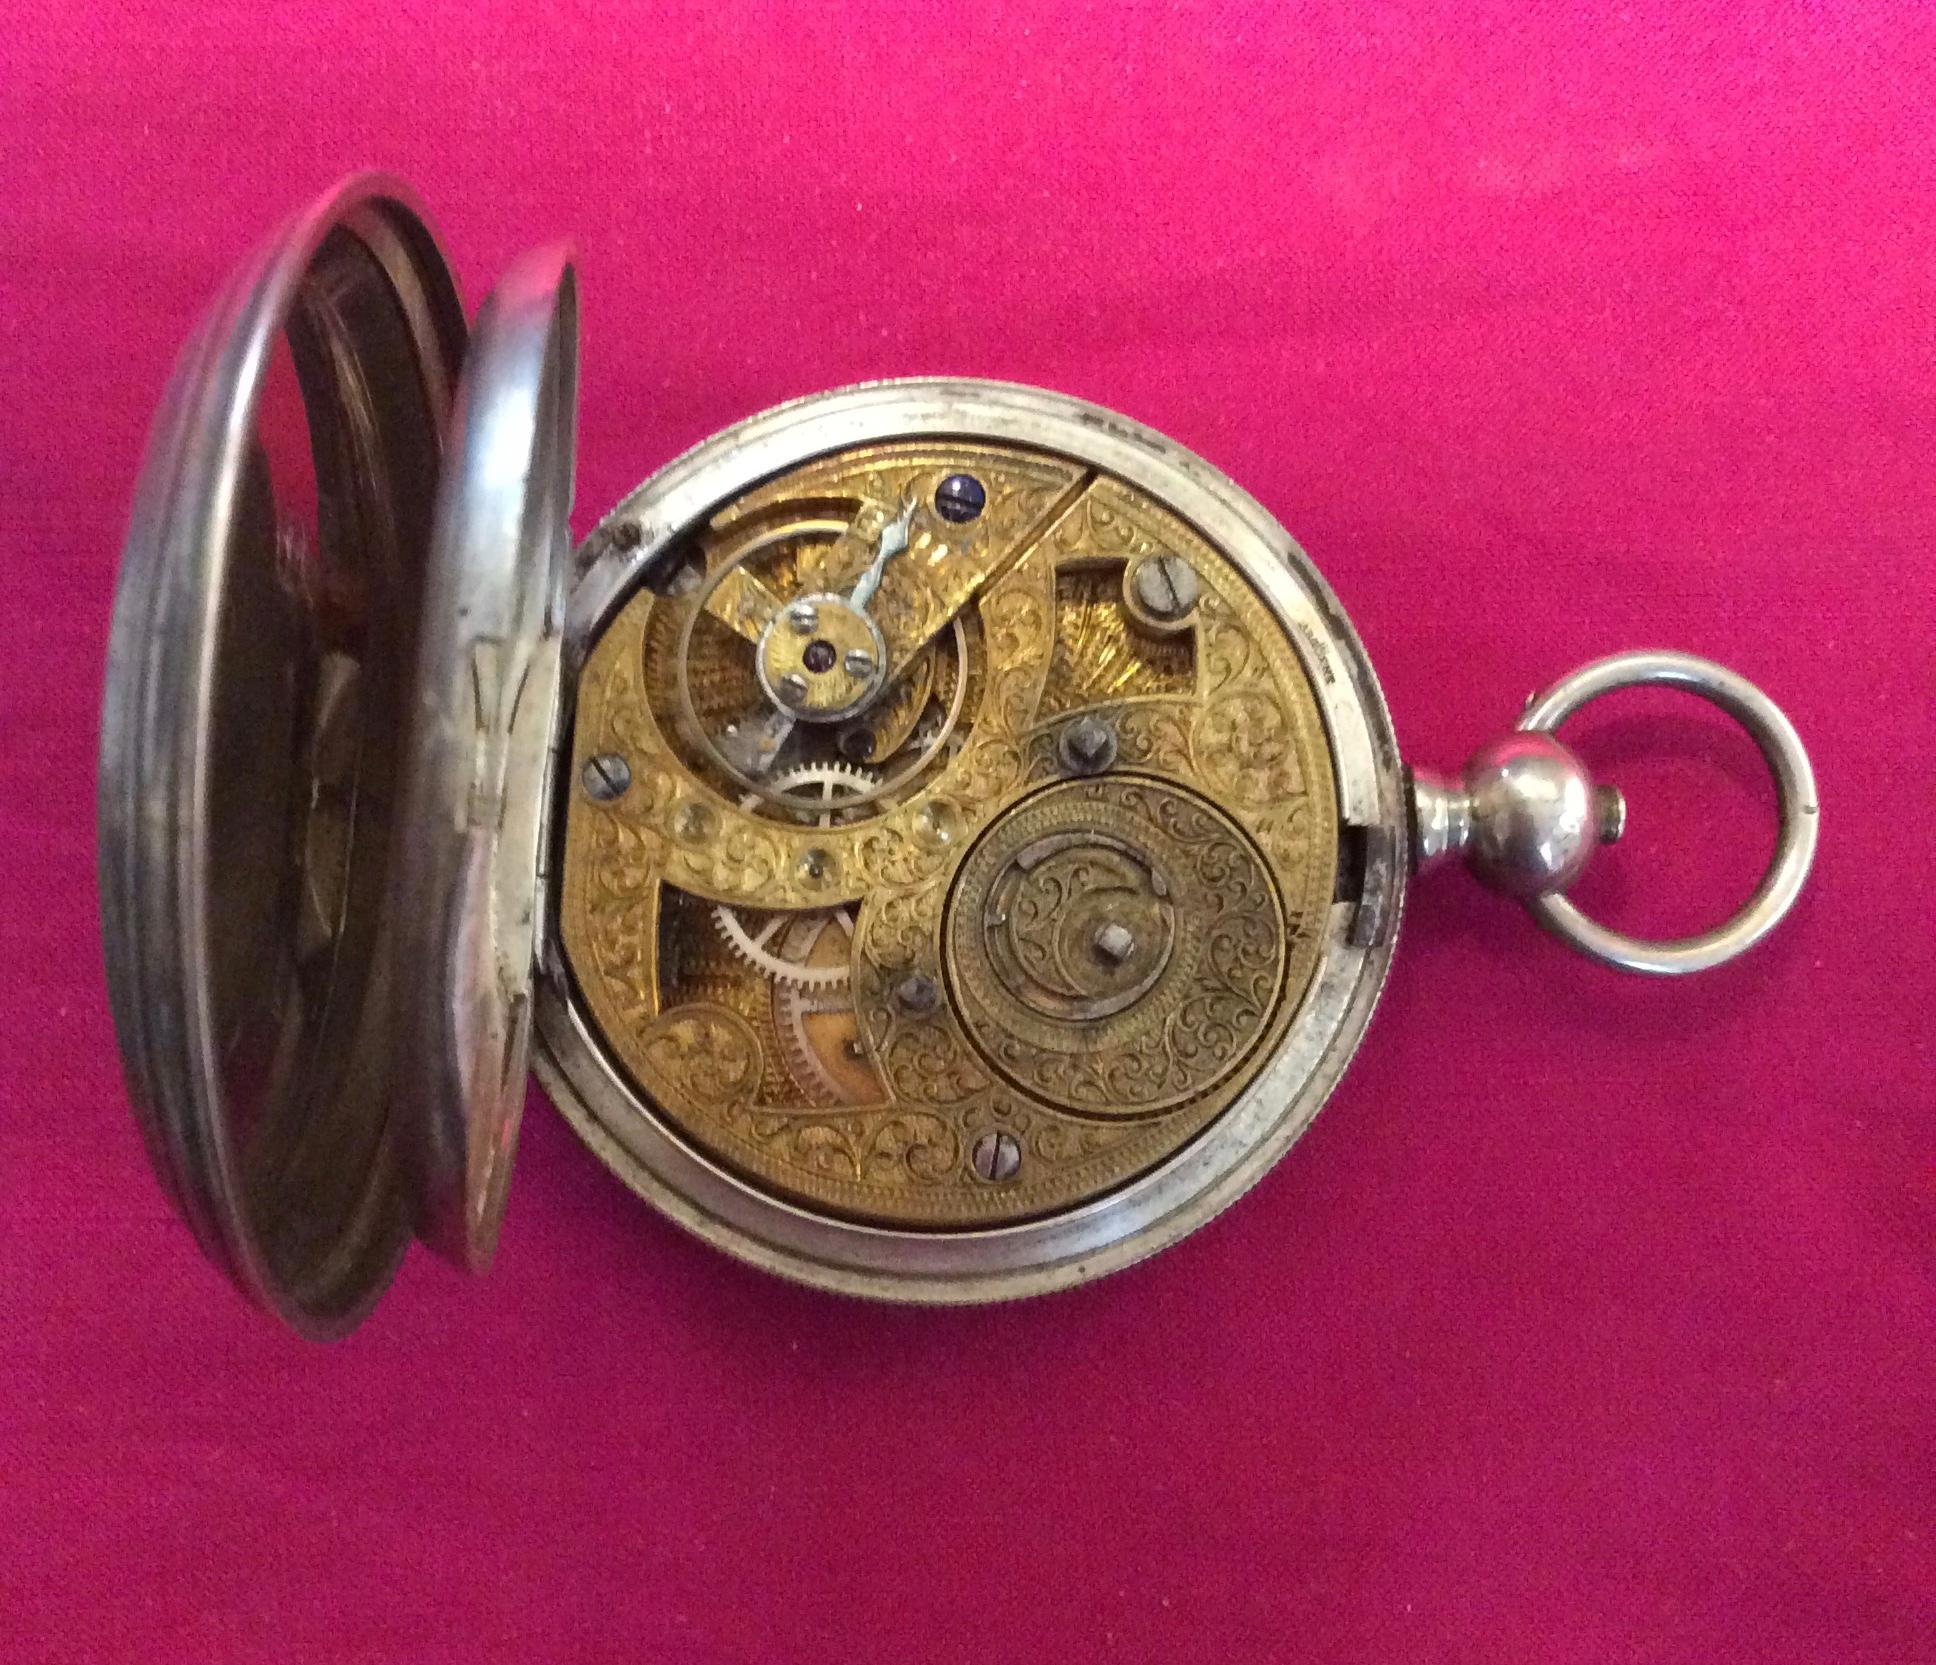 A very specially crafted silver Pocket watch. This lovely piece is a twin- dial, one signed ‘Bombay’ and another ‘Railway Time’. It is also a sweep second and to be wound with key. In superb condition, circa 1890. 